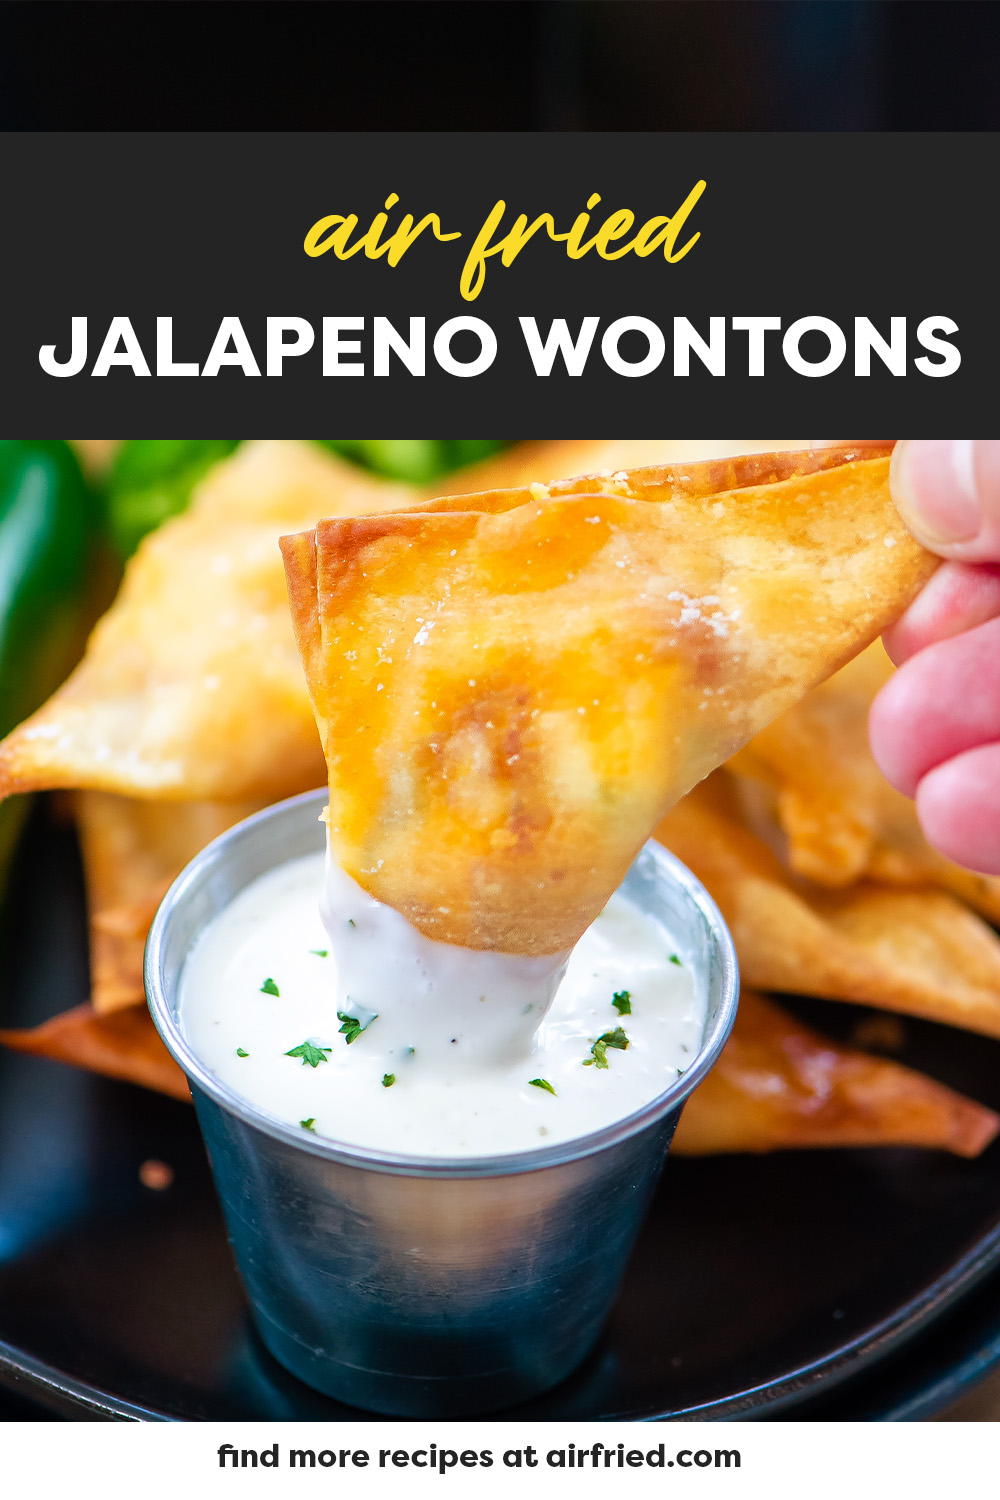 A person dipping a jalapeno wonton into ranch dressing.